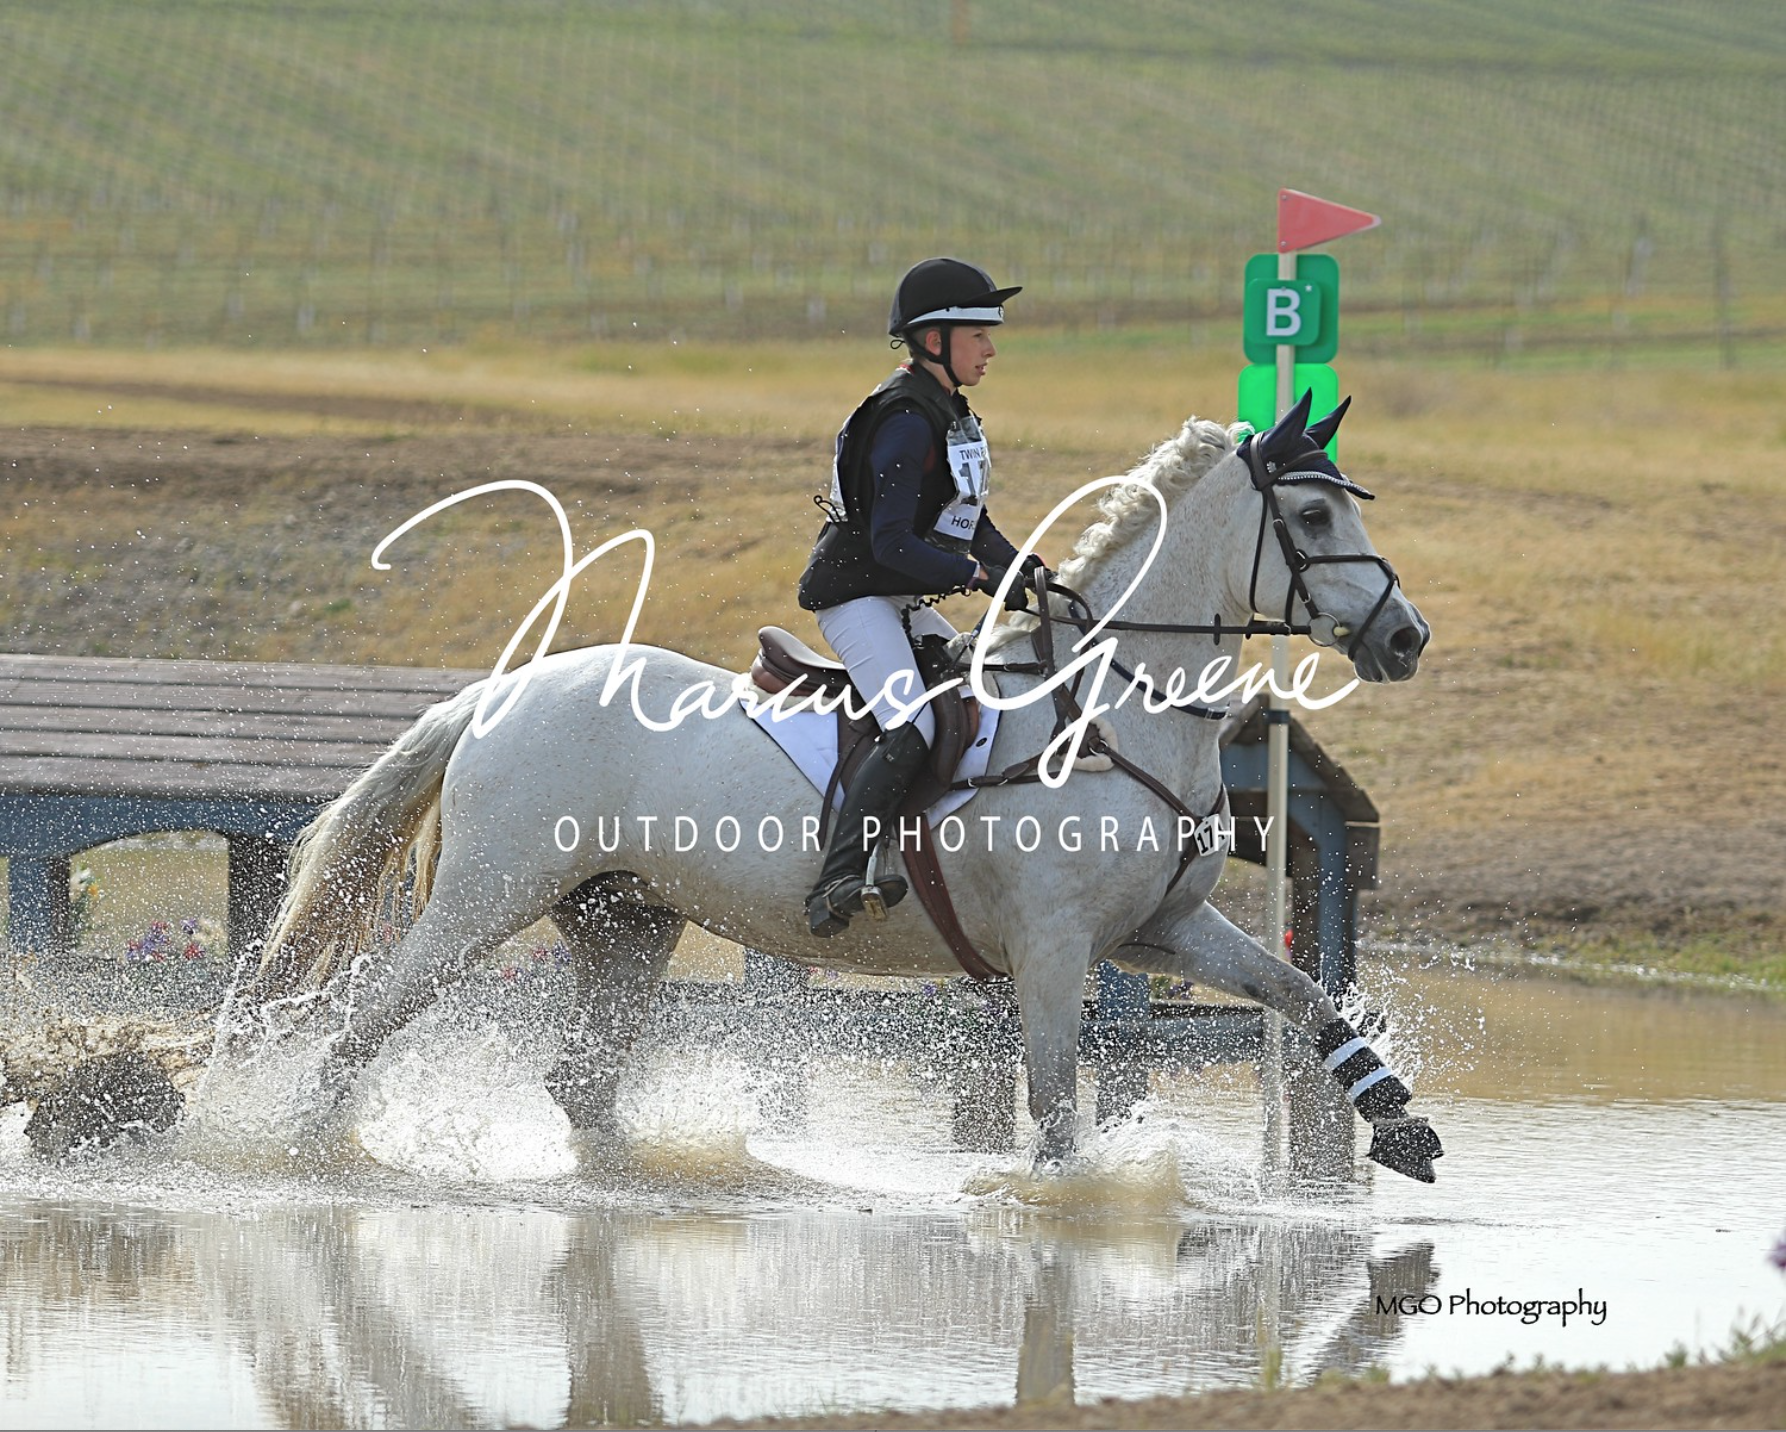 Century Hills Taylor Maide Twin Rivers XC Water April 2018.png